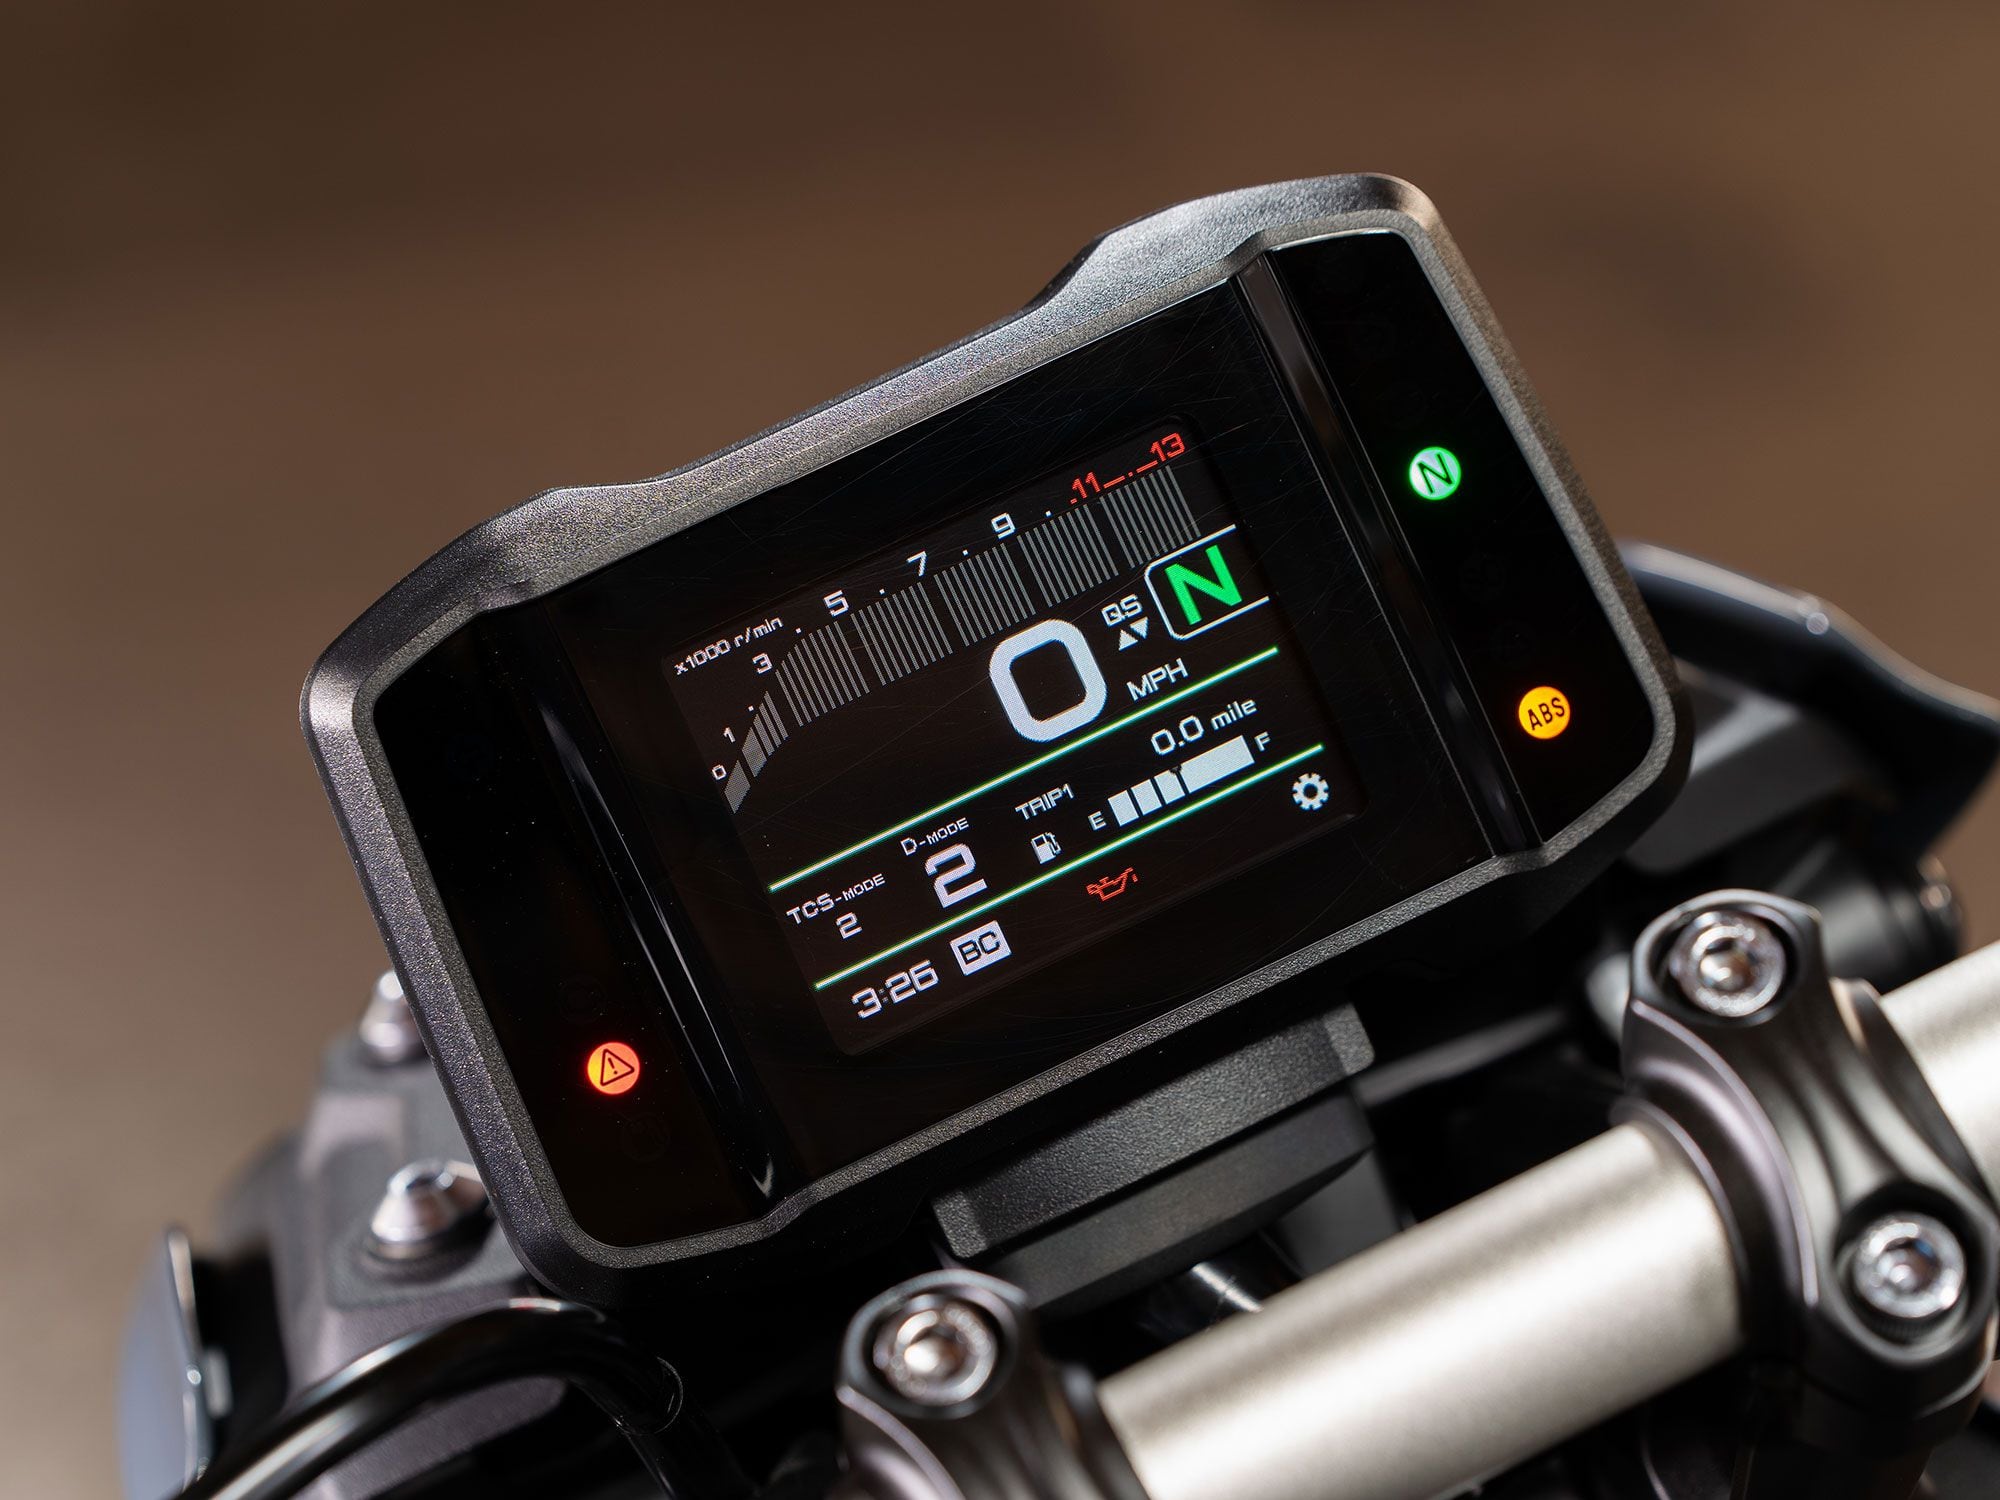 A 3.5-inch color TFT display keeps tabs on vehicle settings. We wish it was larger.